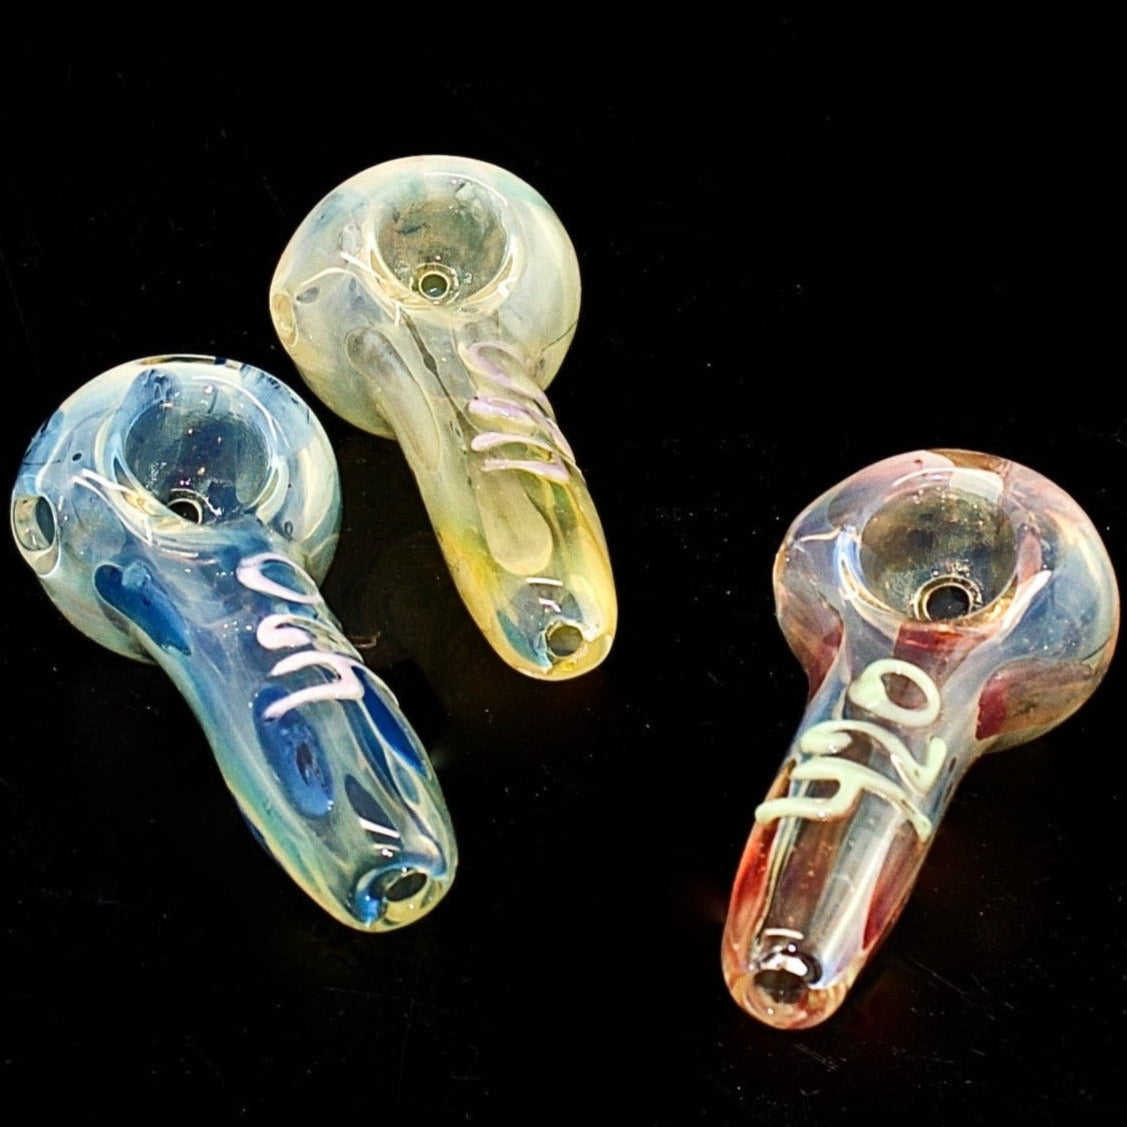 420 3.5 inches Smoking Glass Pipe | Wholesale Glass Pipe-193